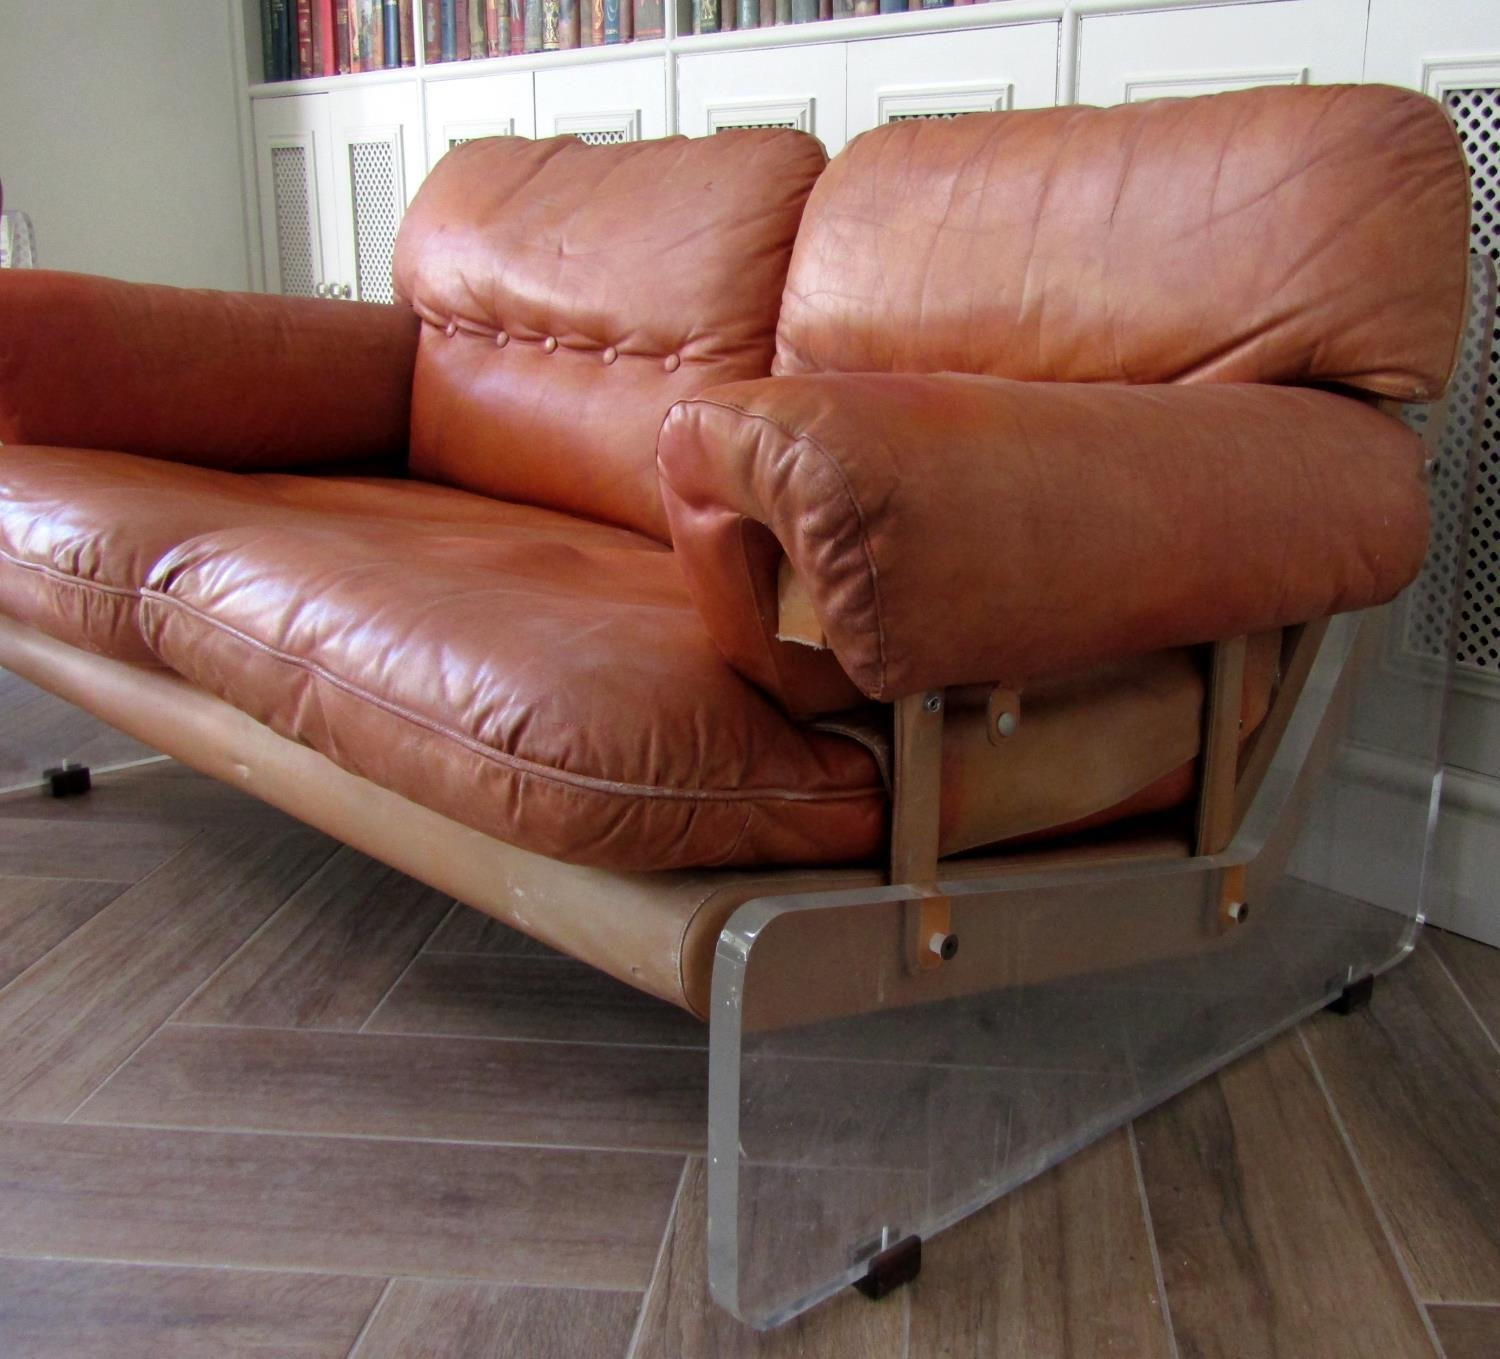 Unusual Italian 1960s tan leather sofa, with button back upholstery upon thick lucite/perspex - Image 2 of 4